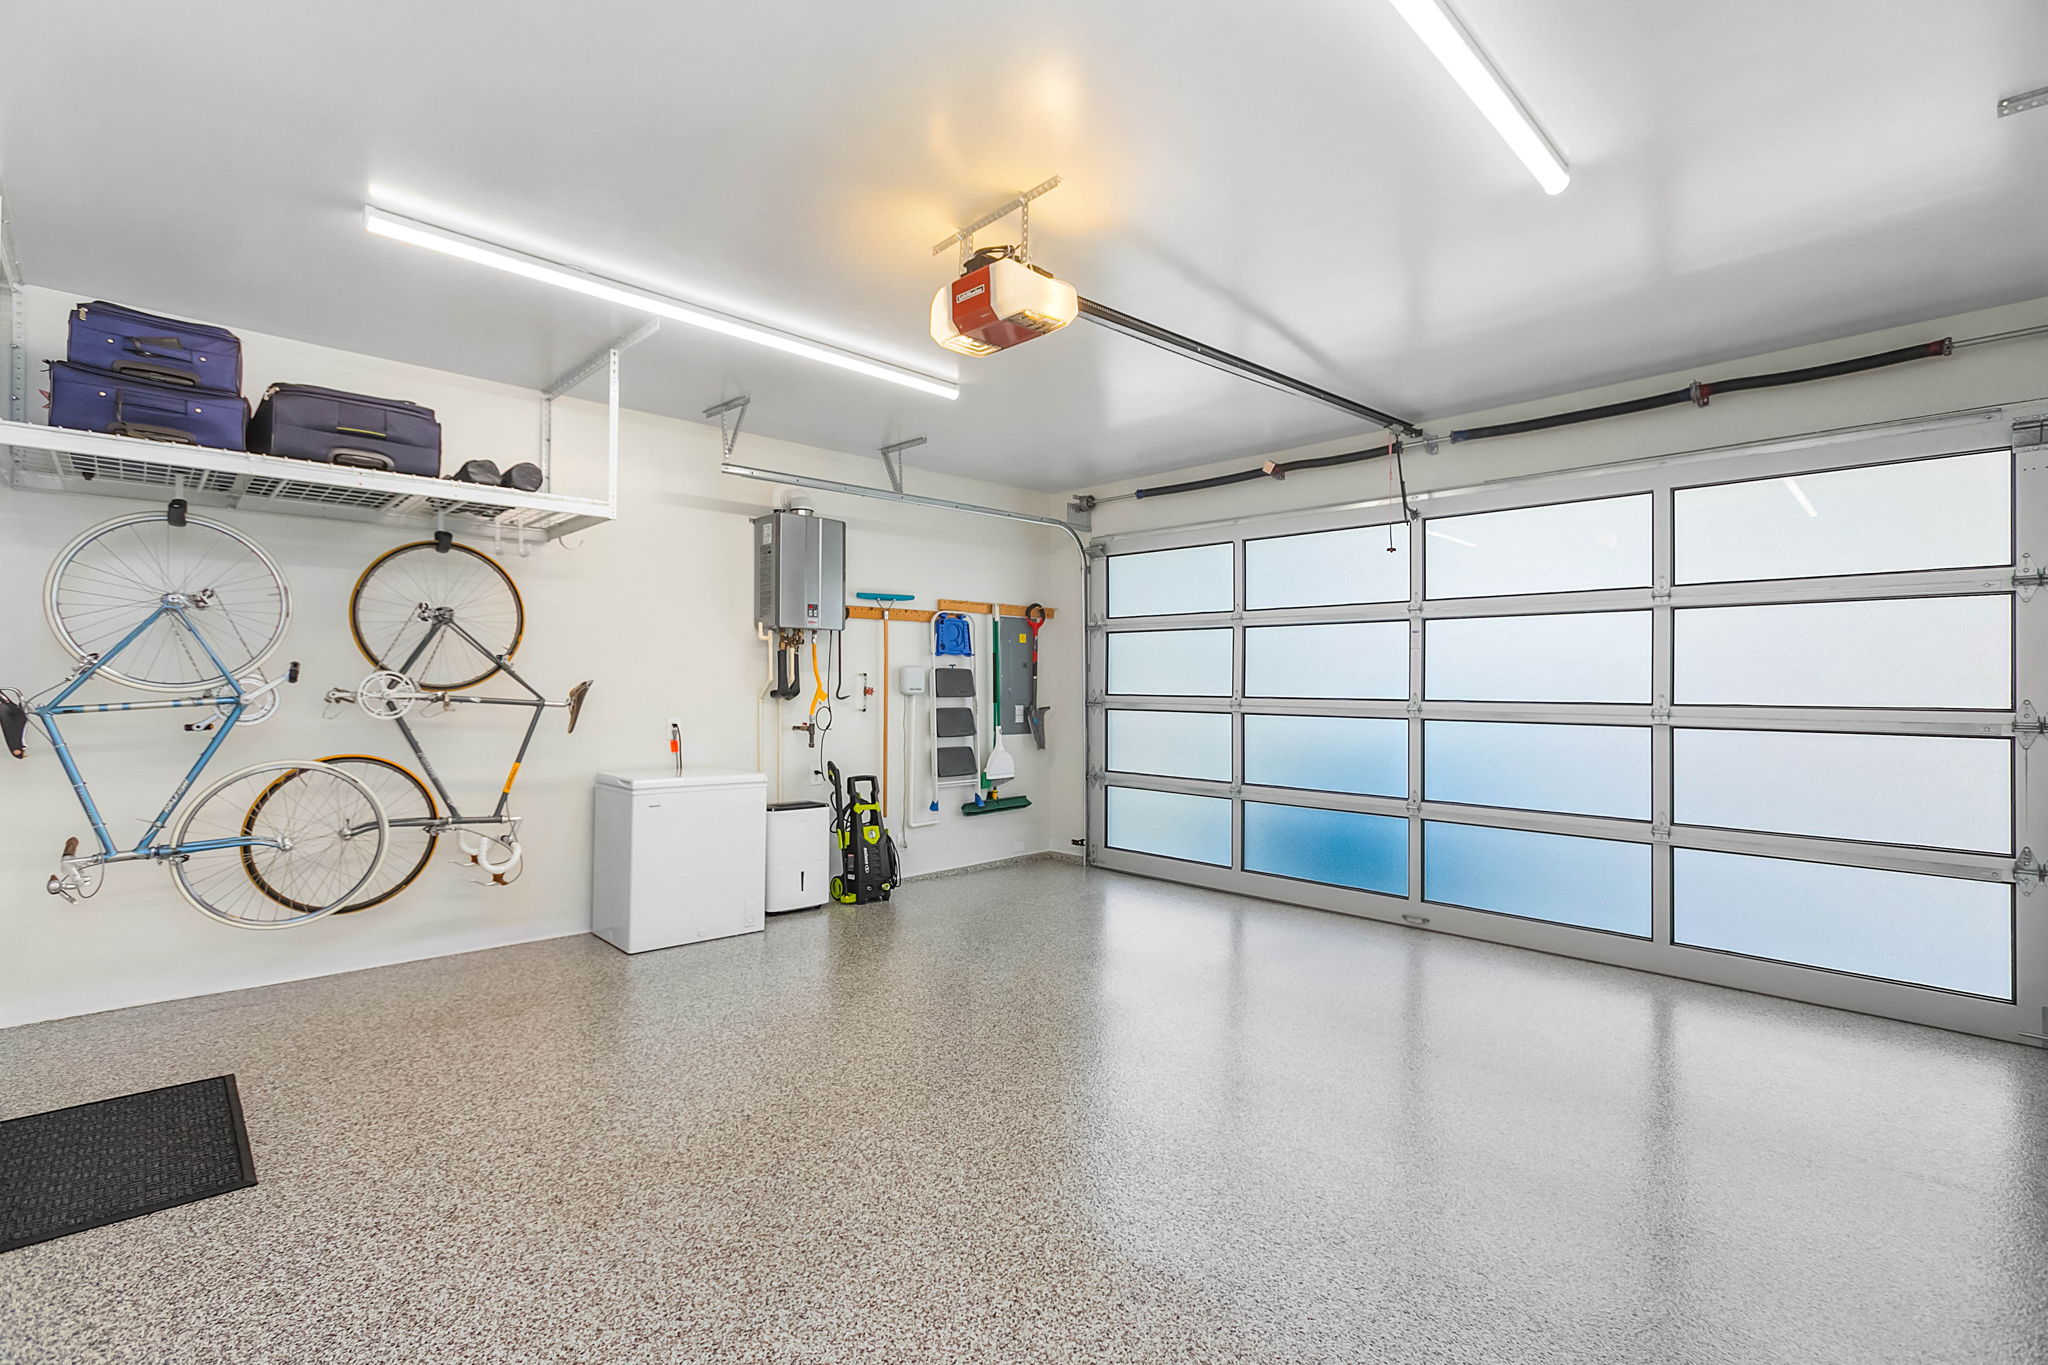 Stunning garage, insulated and poly-aspartic flooring.